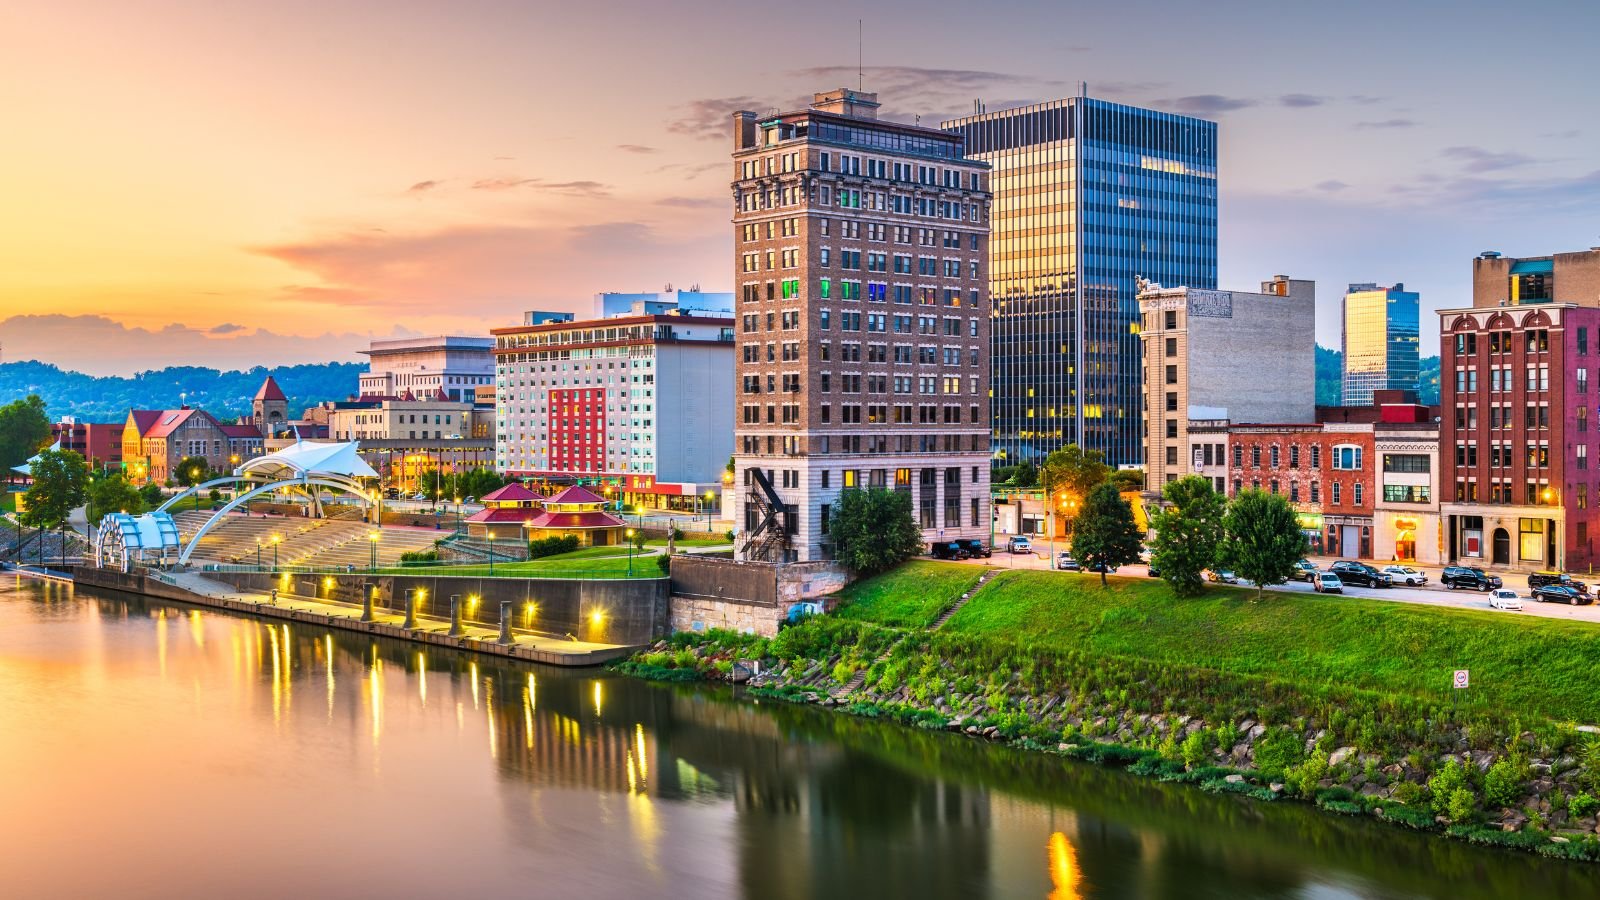 <p>It sits between the Elk and Kanawha rivers. The city charms seniors with historic downtown architecture. The natural beauty of the Appalachian foothills surrounds it. The Riverwalk runs along the Kanawha andoffers a relaxing place to take an evening stroll. Then, you can dine at an award-winning restaurants.</p>